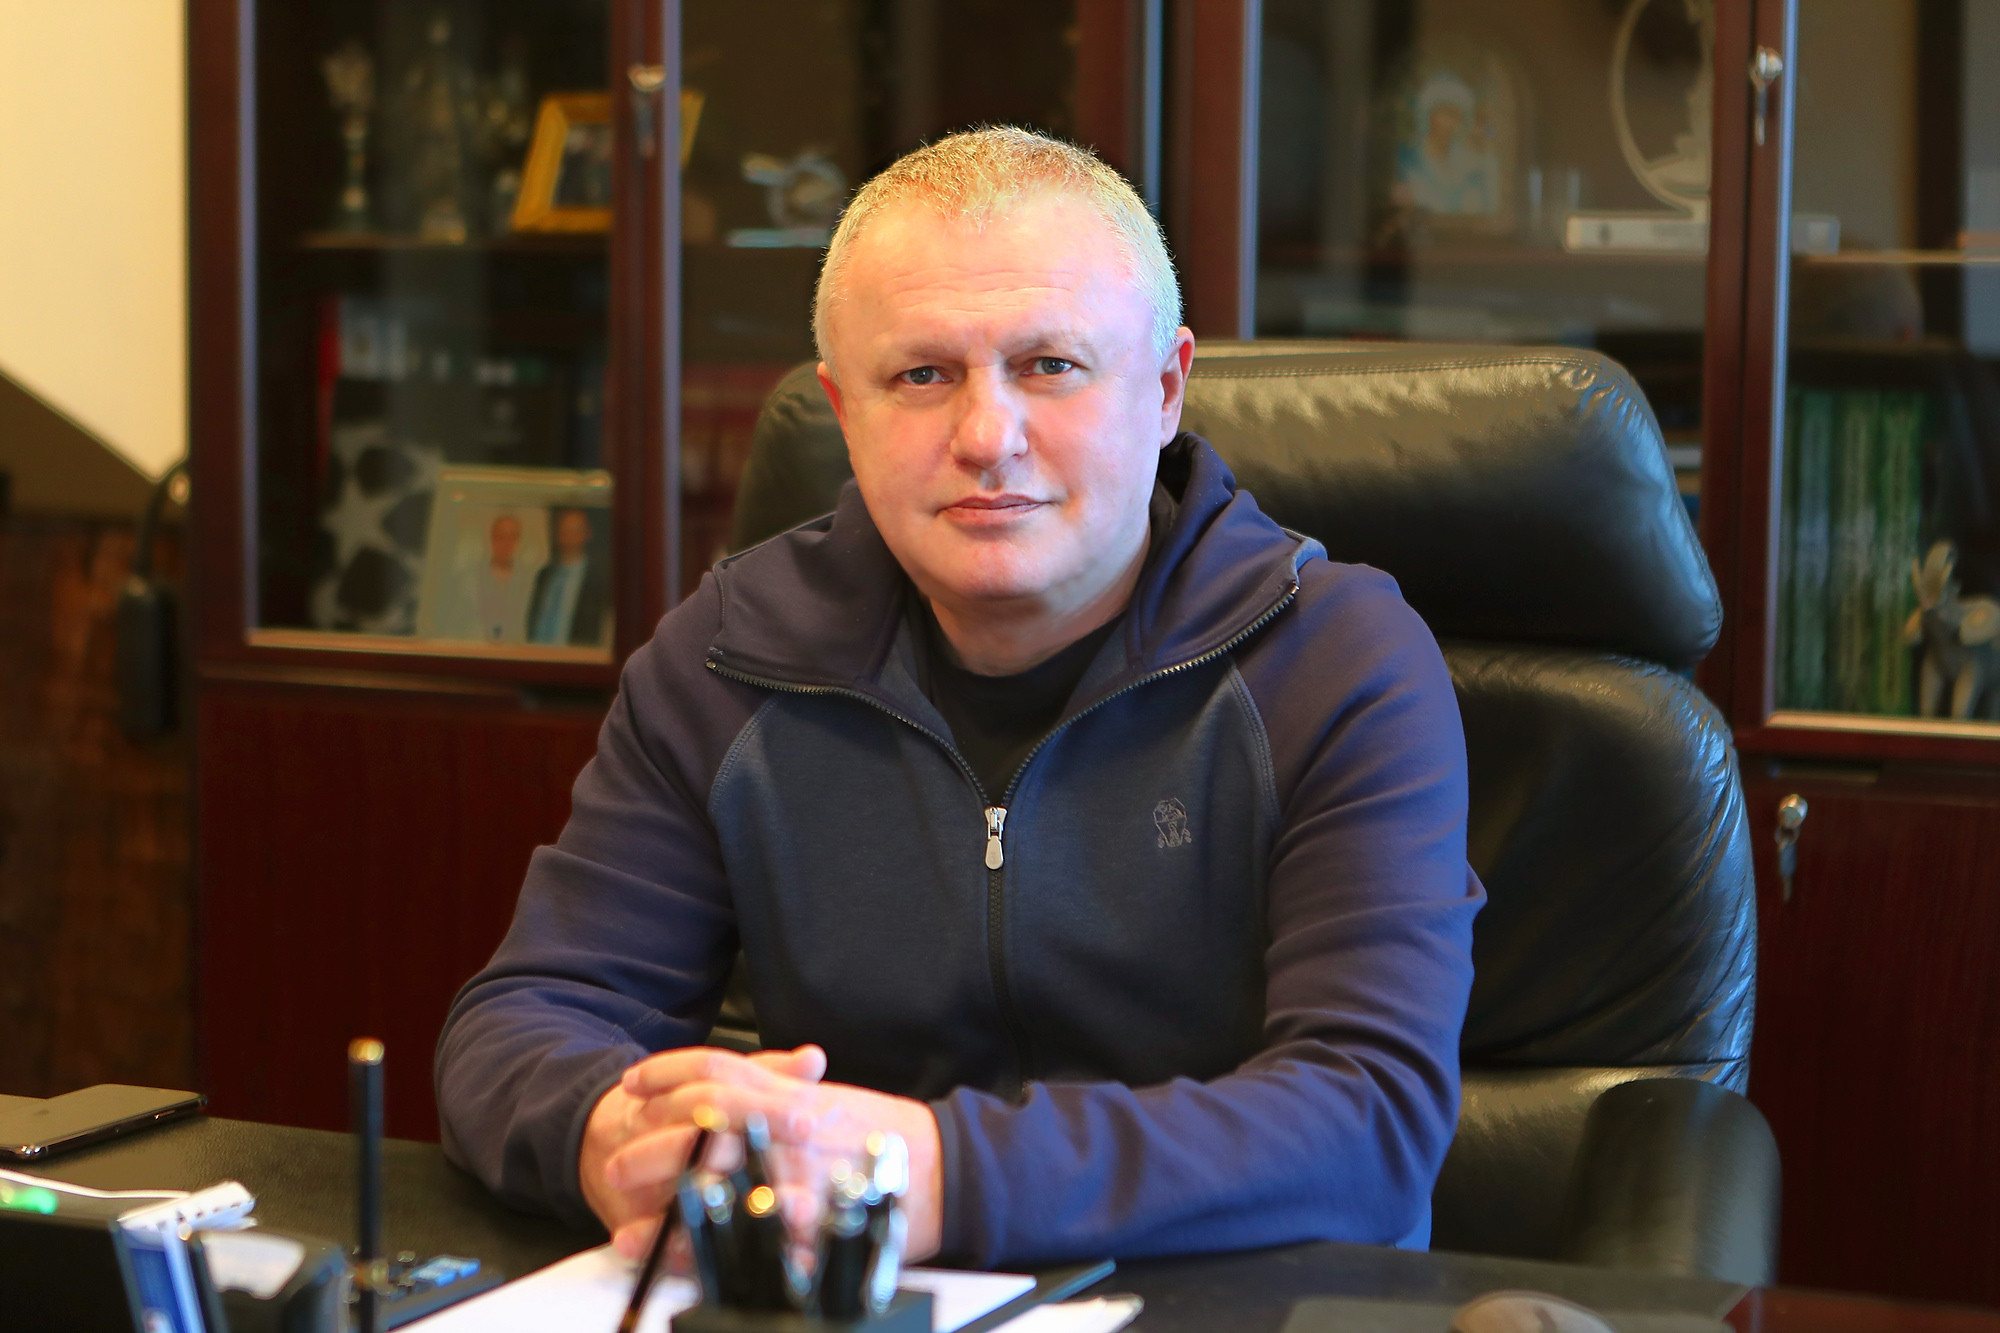 Ihor Surkis: “There will be enforcement”